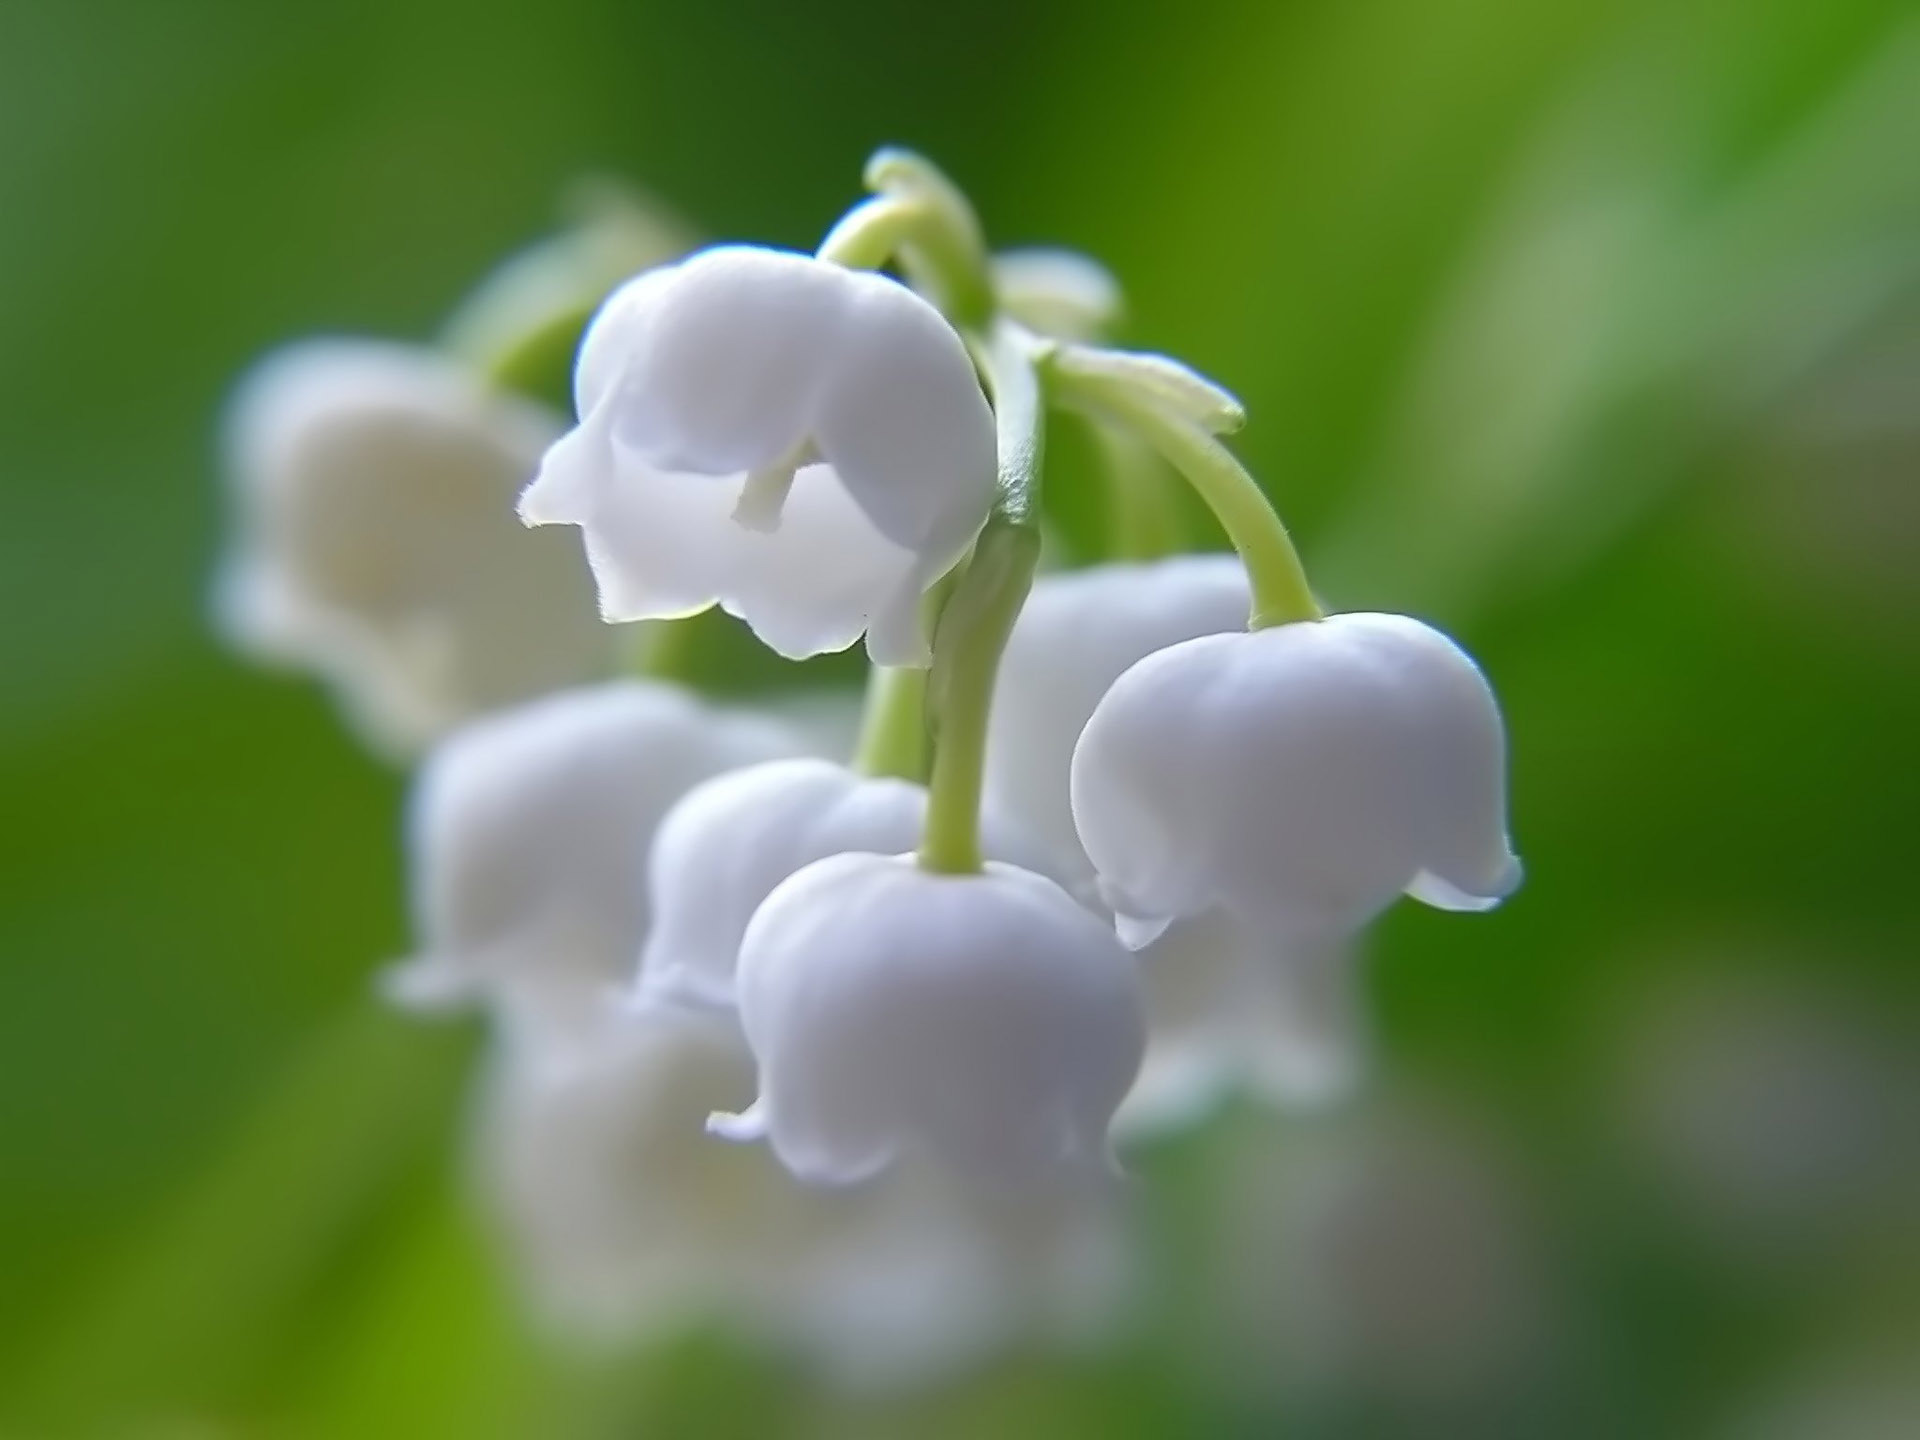 12487 download wallpaper plants, flowers, lily of the valley screensavers and pictures for free